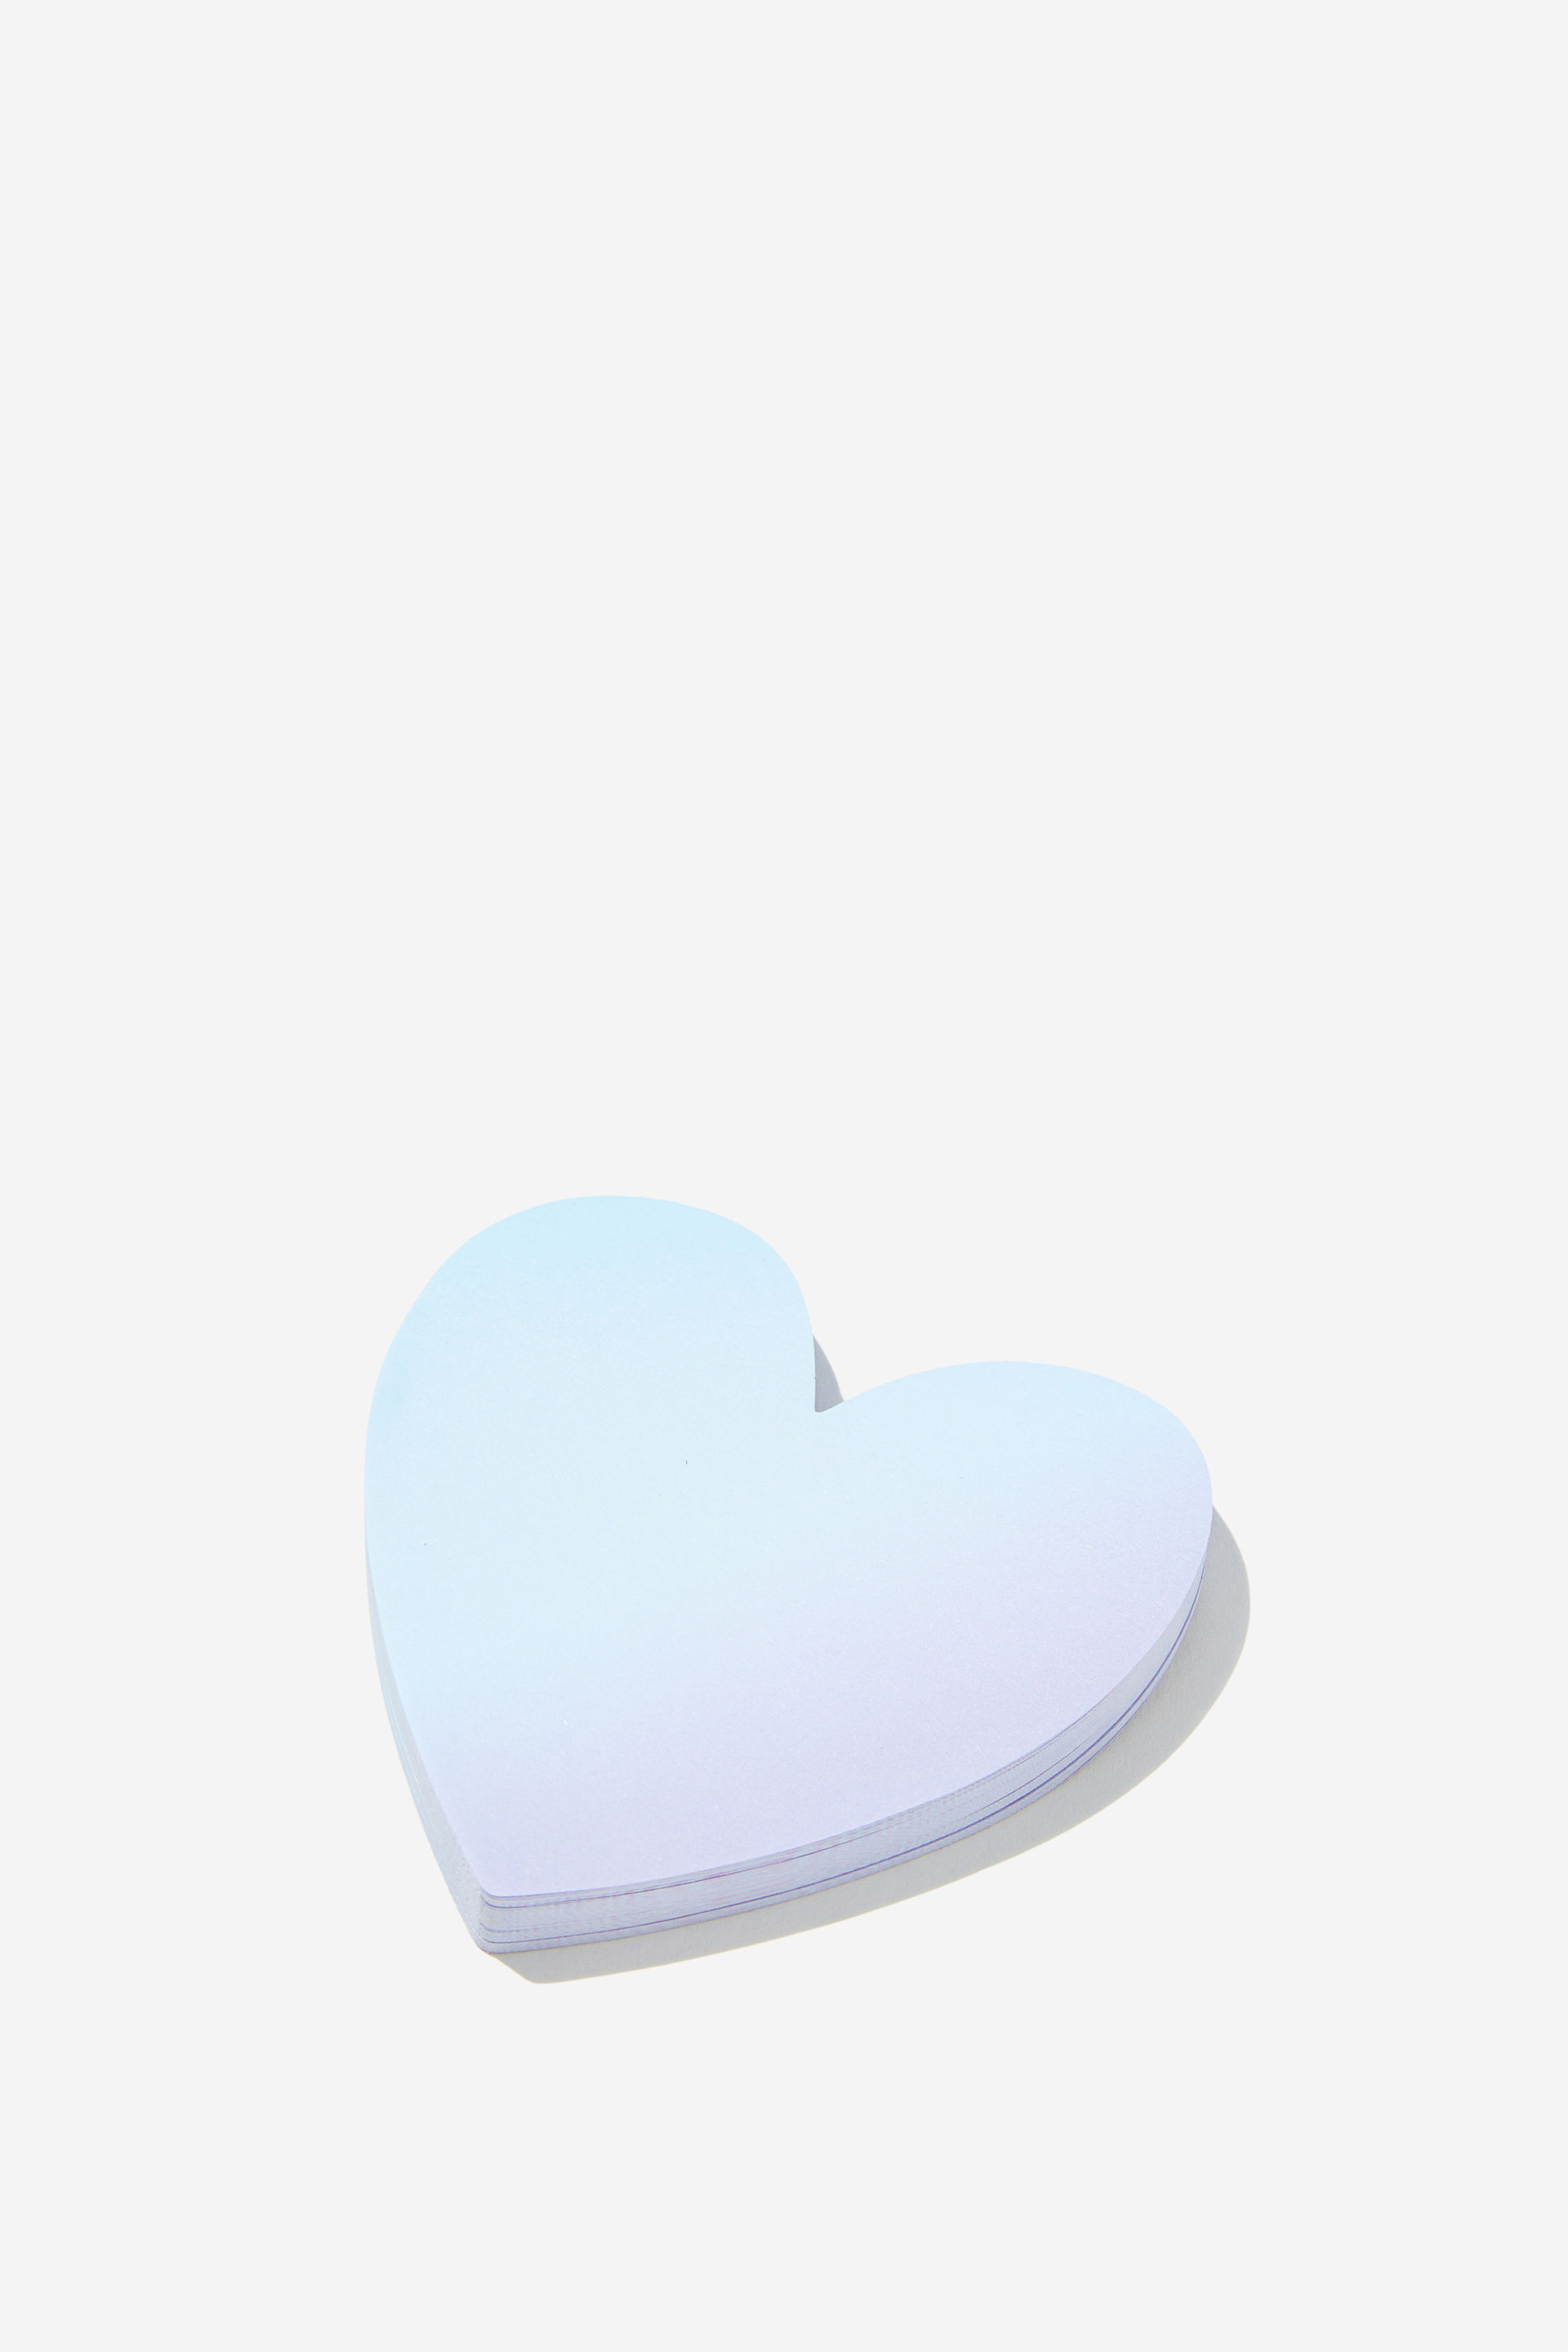 Typo - Shaped Sticky Notes - Lilac ombre heart